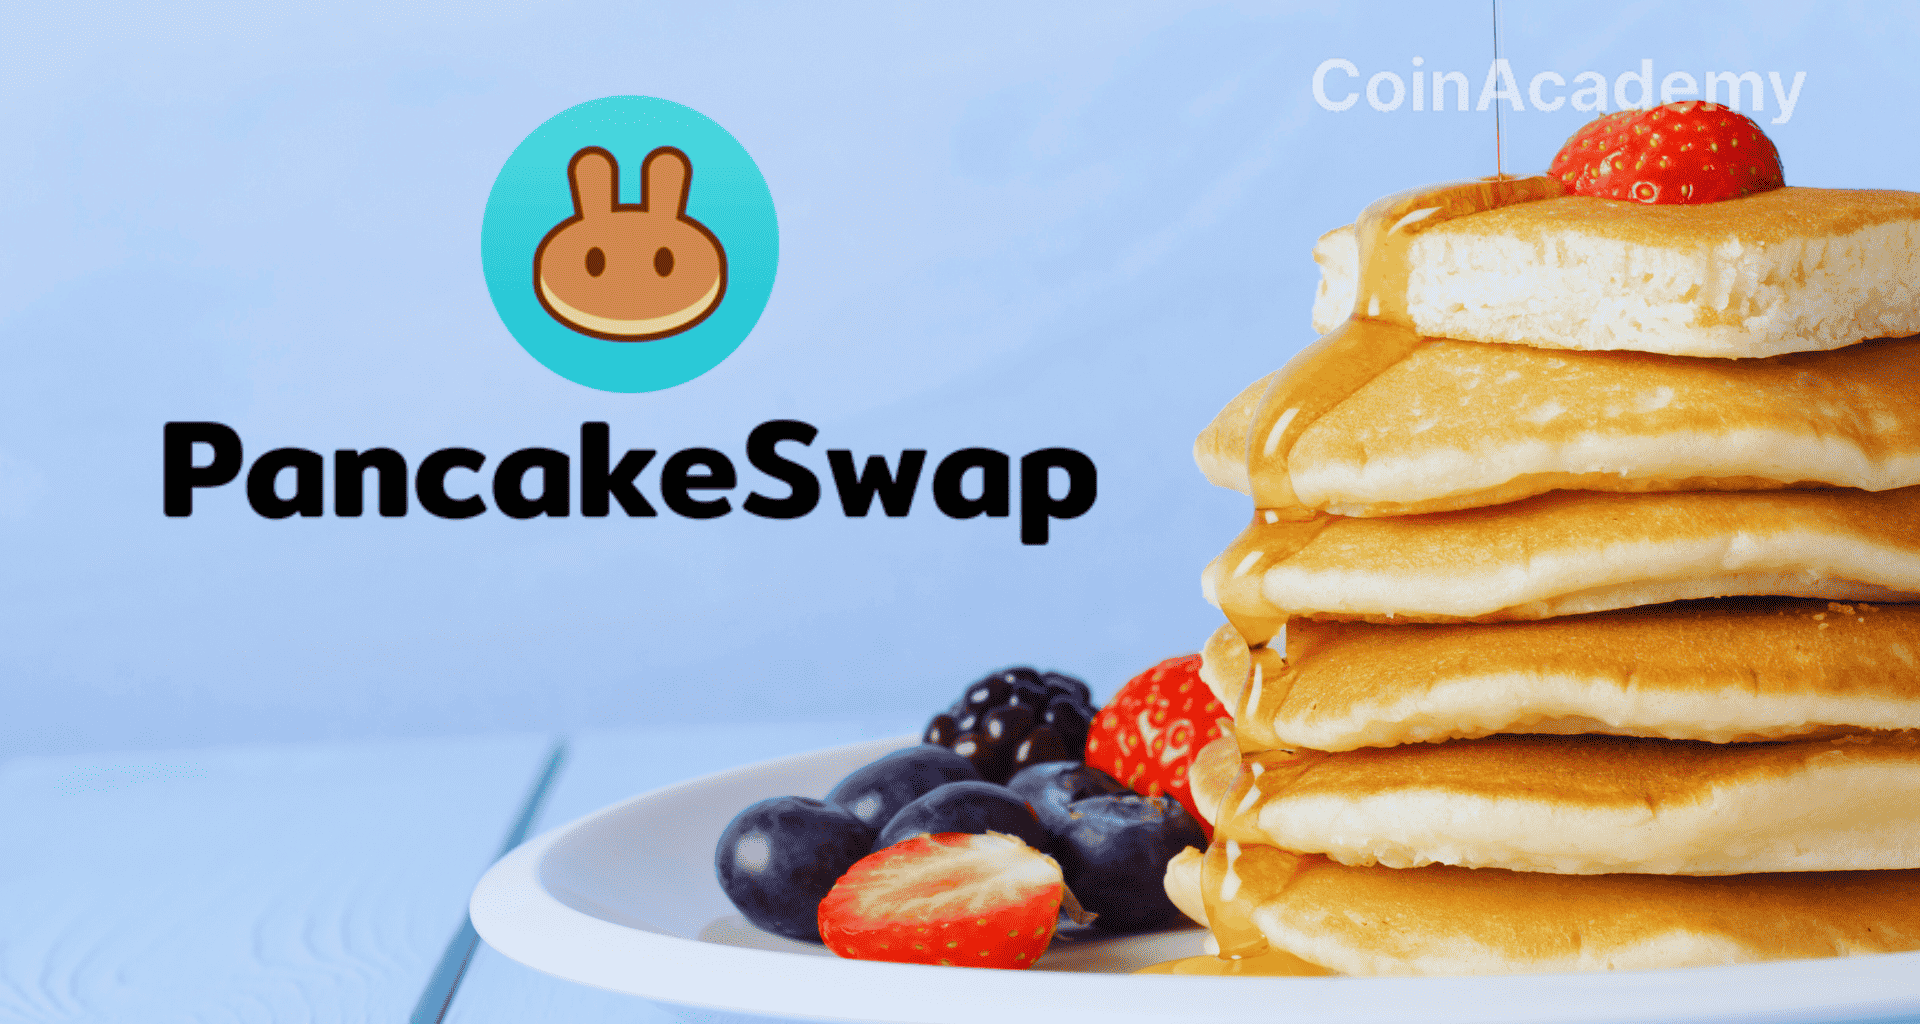 pancakeswap cake offre totale